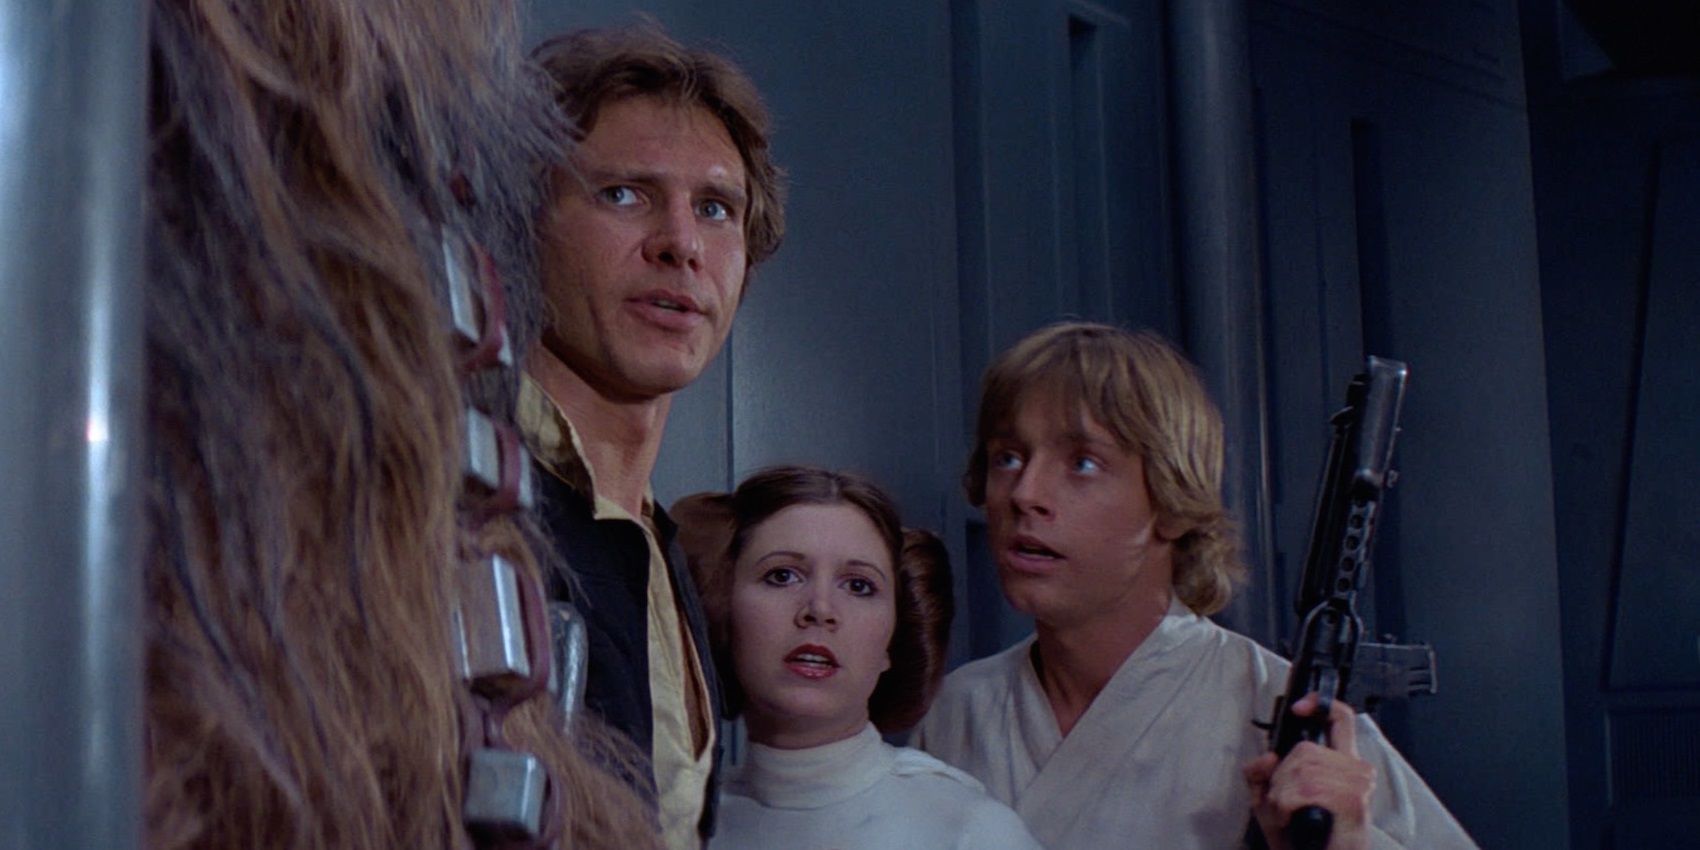 Luke, Han, Leia, and Chewie on the Death Star in Star Wars